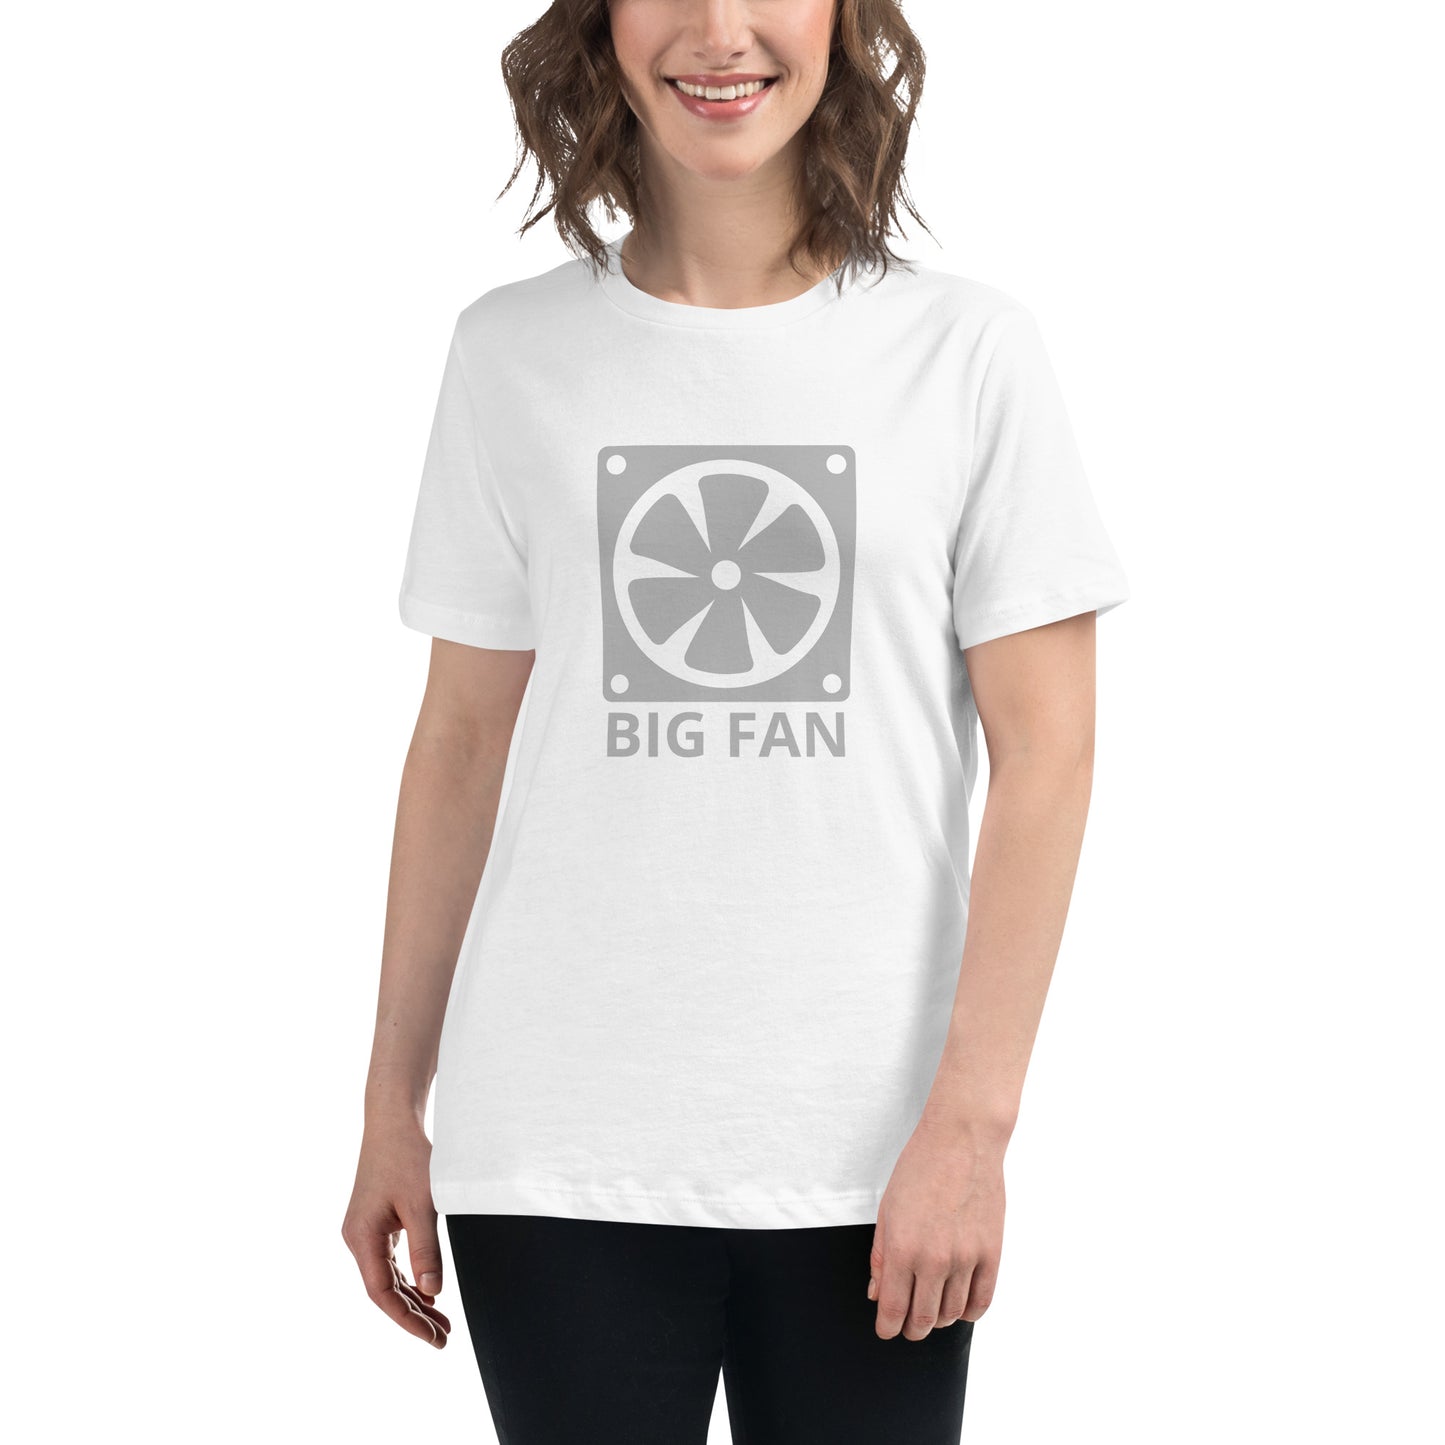 Women with white t-shirt with image of a big computer fan and the text "BIG FAN"